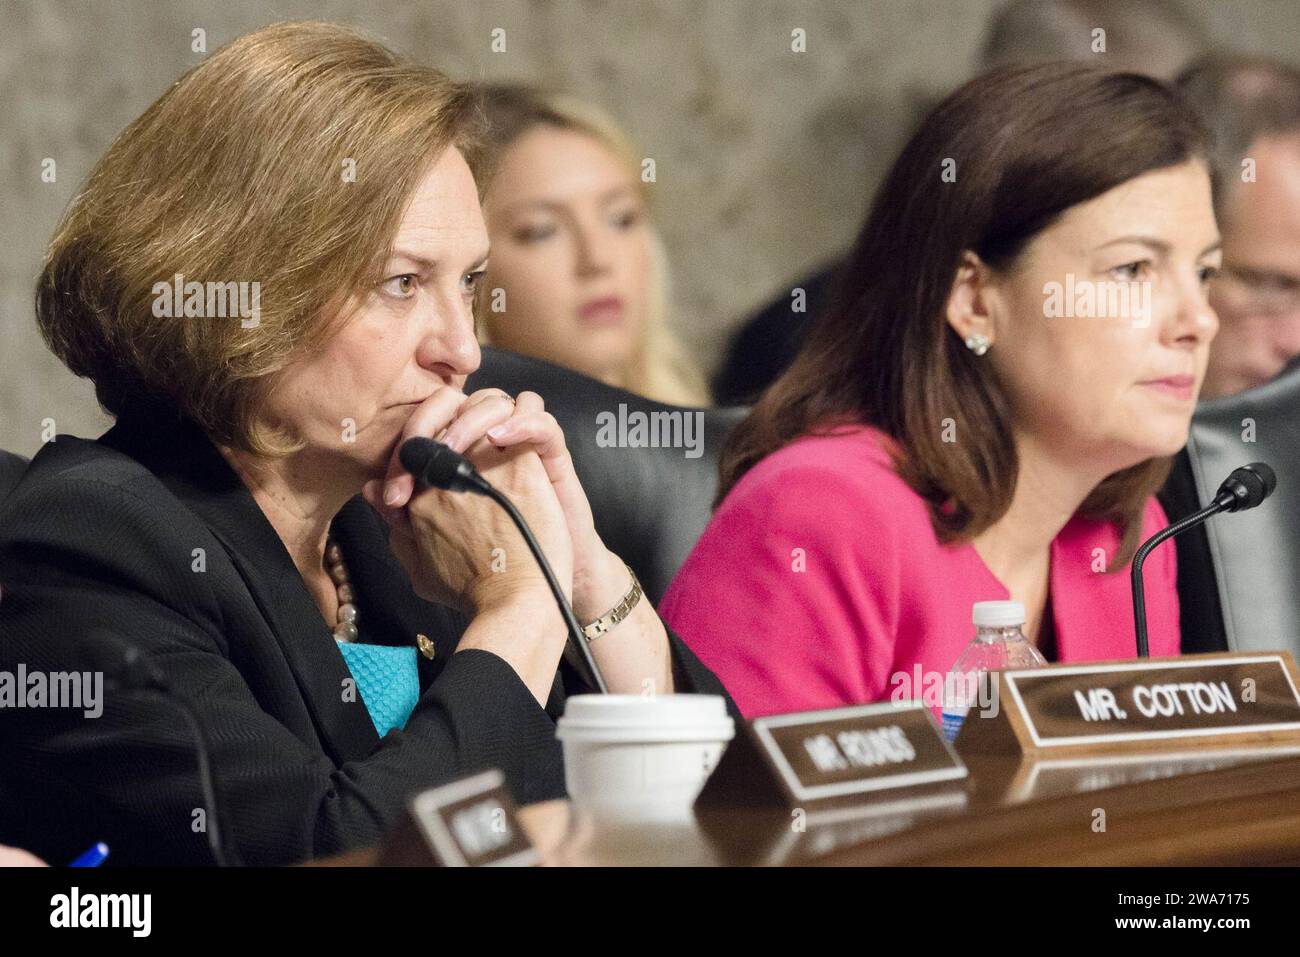 US military forces. U.S. Senate Committee on Armed Services member Senators Deb Fischer and Kelly Ayotte listen to testimony from 18th Chairman of the Joint Chiefs of Staff Gen. Martin E. Dempsey and Secretary of Defense Ashton B. Carter during a hearing discussing Counter-ISIL(Islamic State of Iraq and the Levant) Strategy, on Capitol Hill, July 7, 2015. DoD photo by Army Staff Sgt. Sean K. Harp/Released Stock Photo